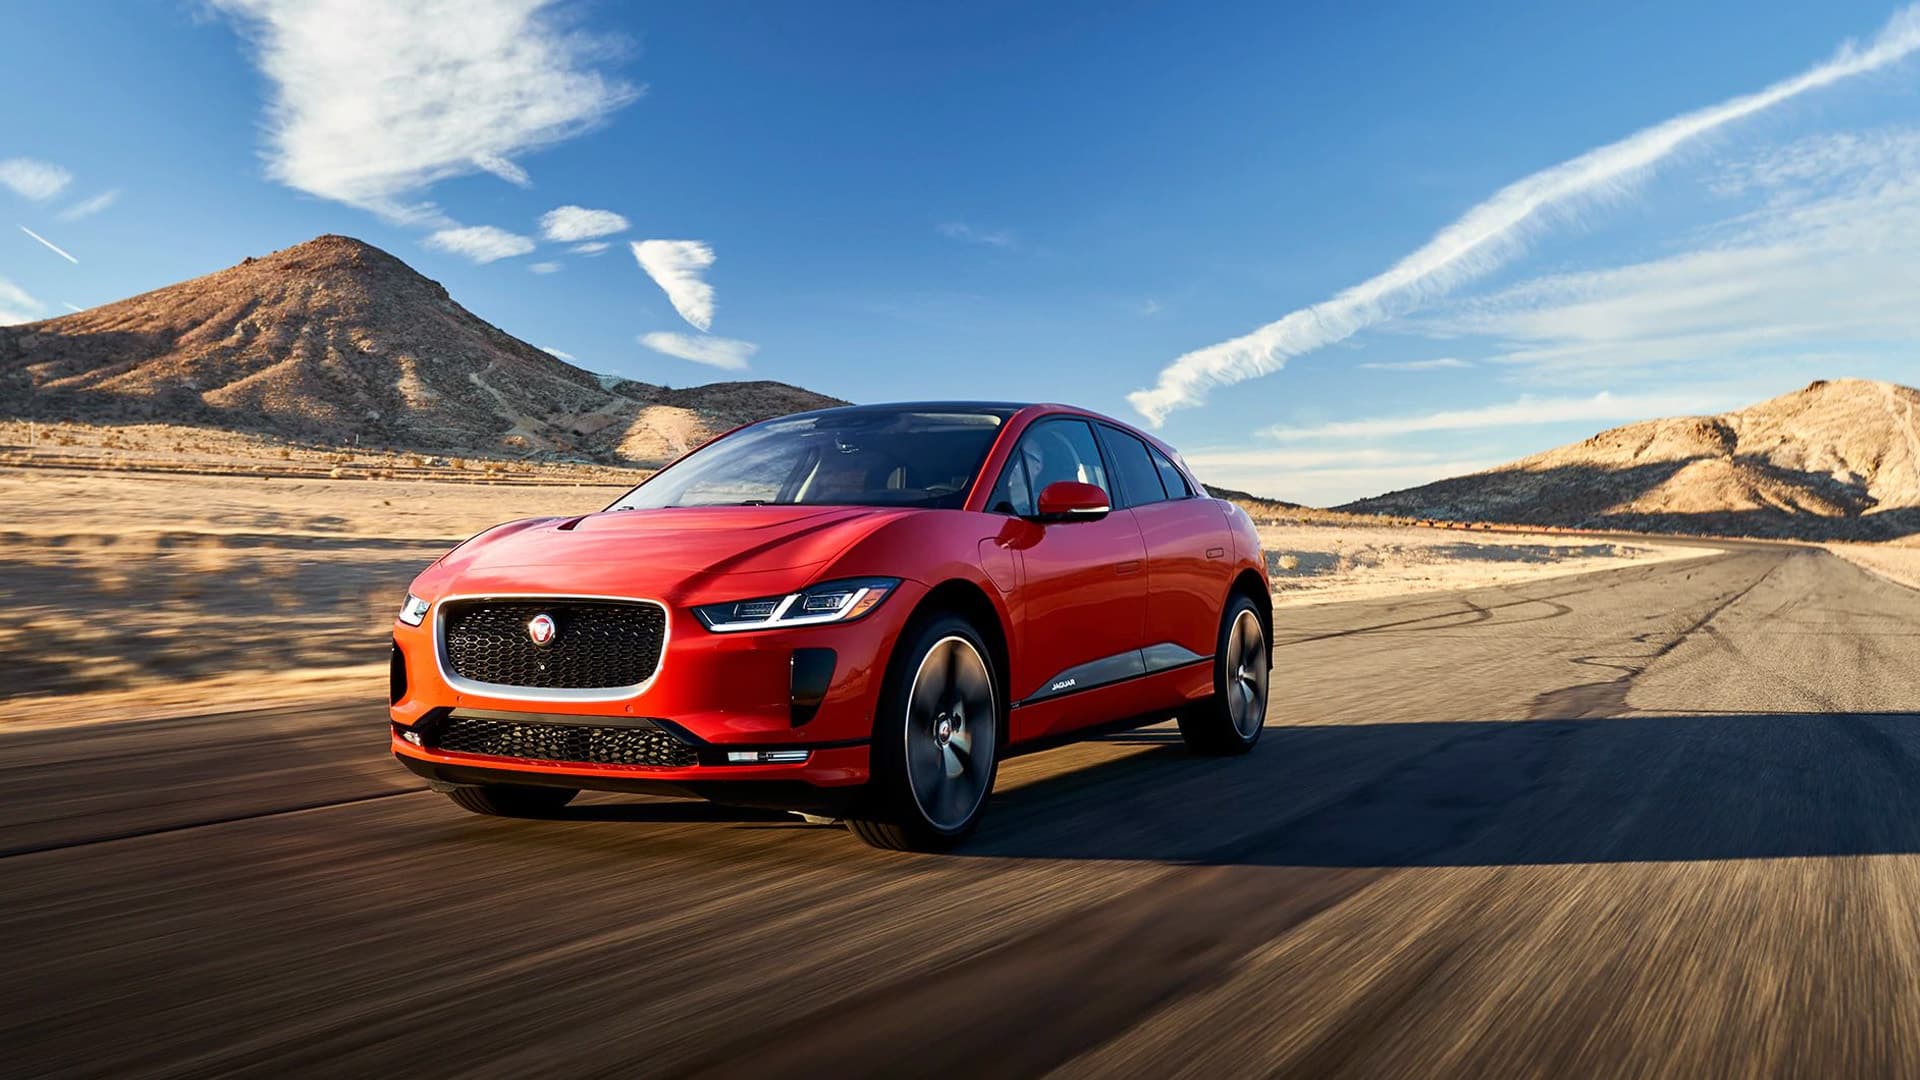 JLR drives in all electric SUV I-PACE in India with price starting at Rs 1.05 cr